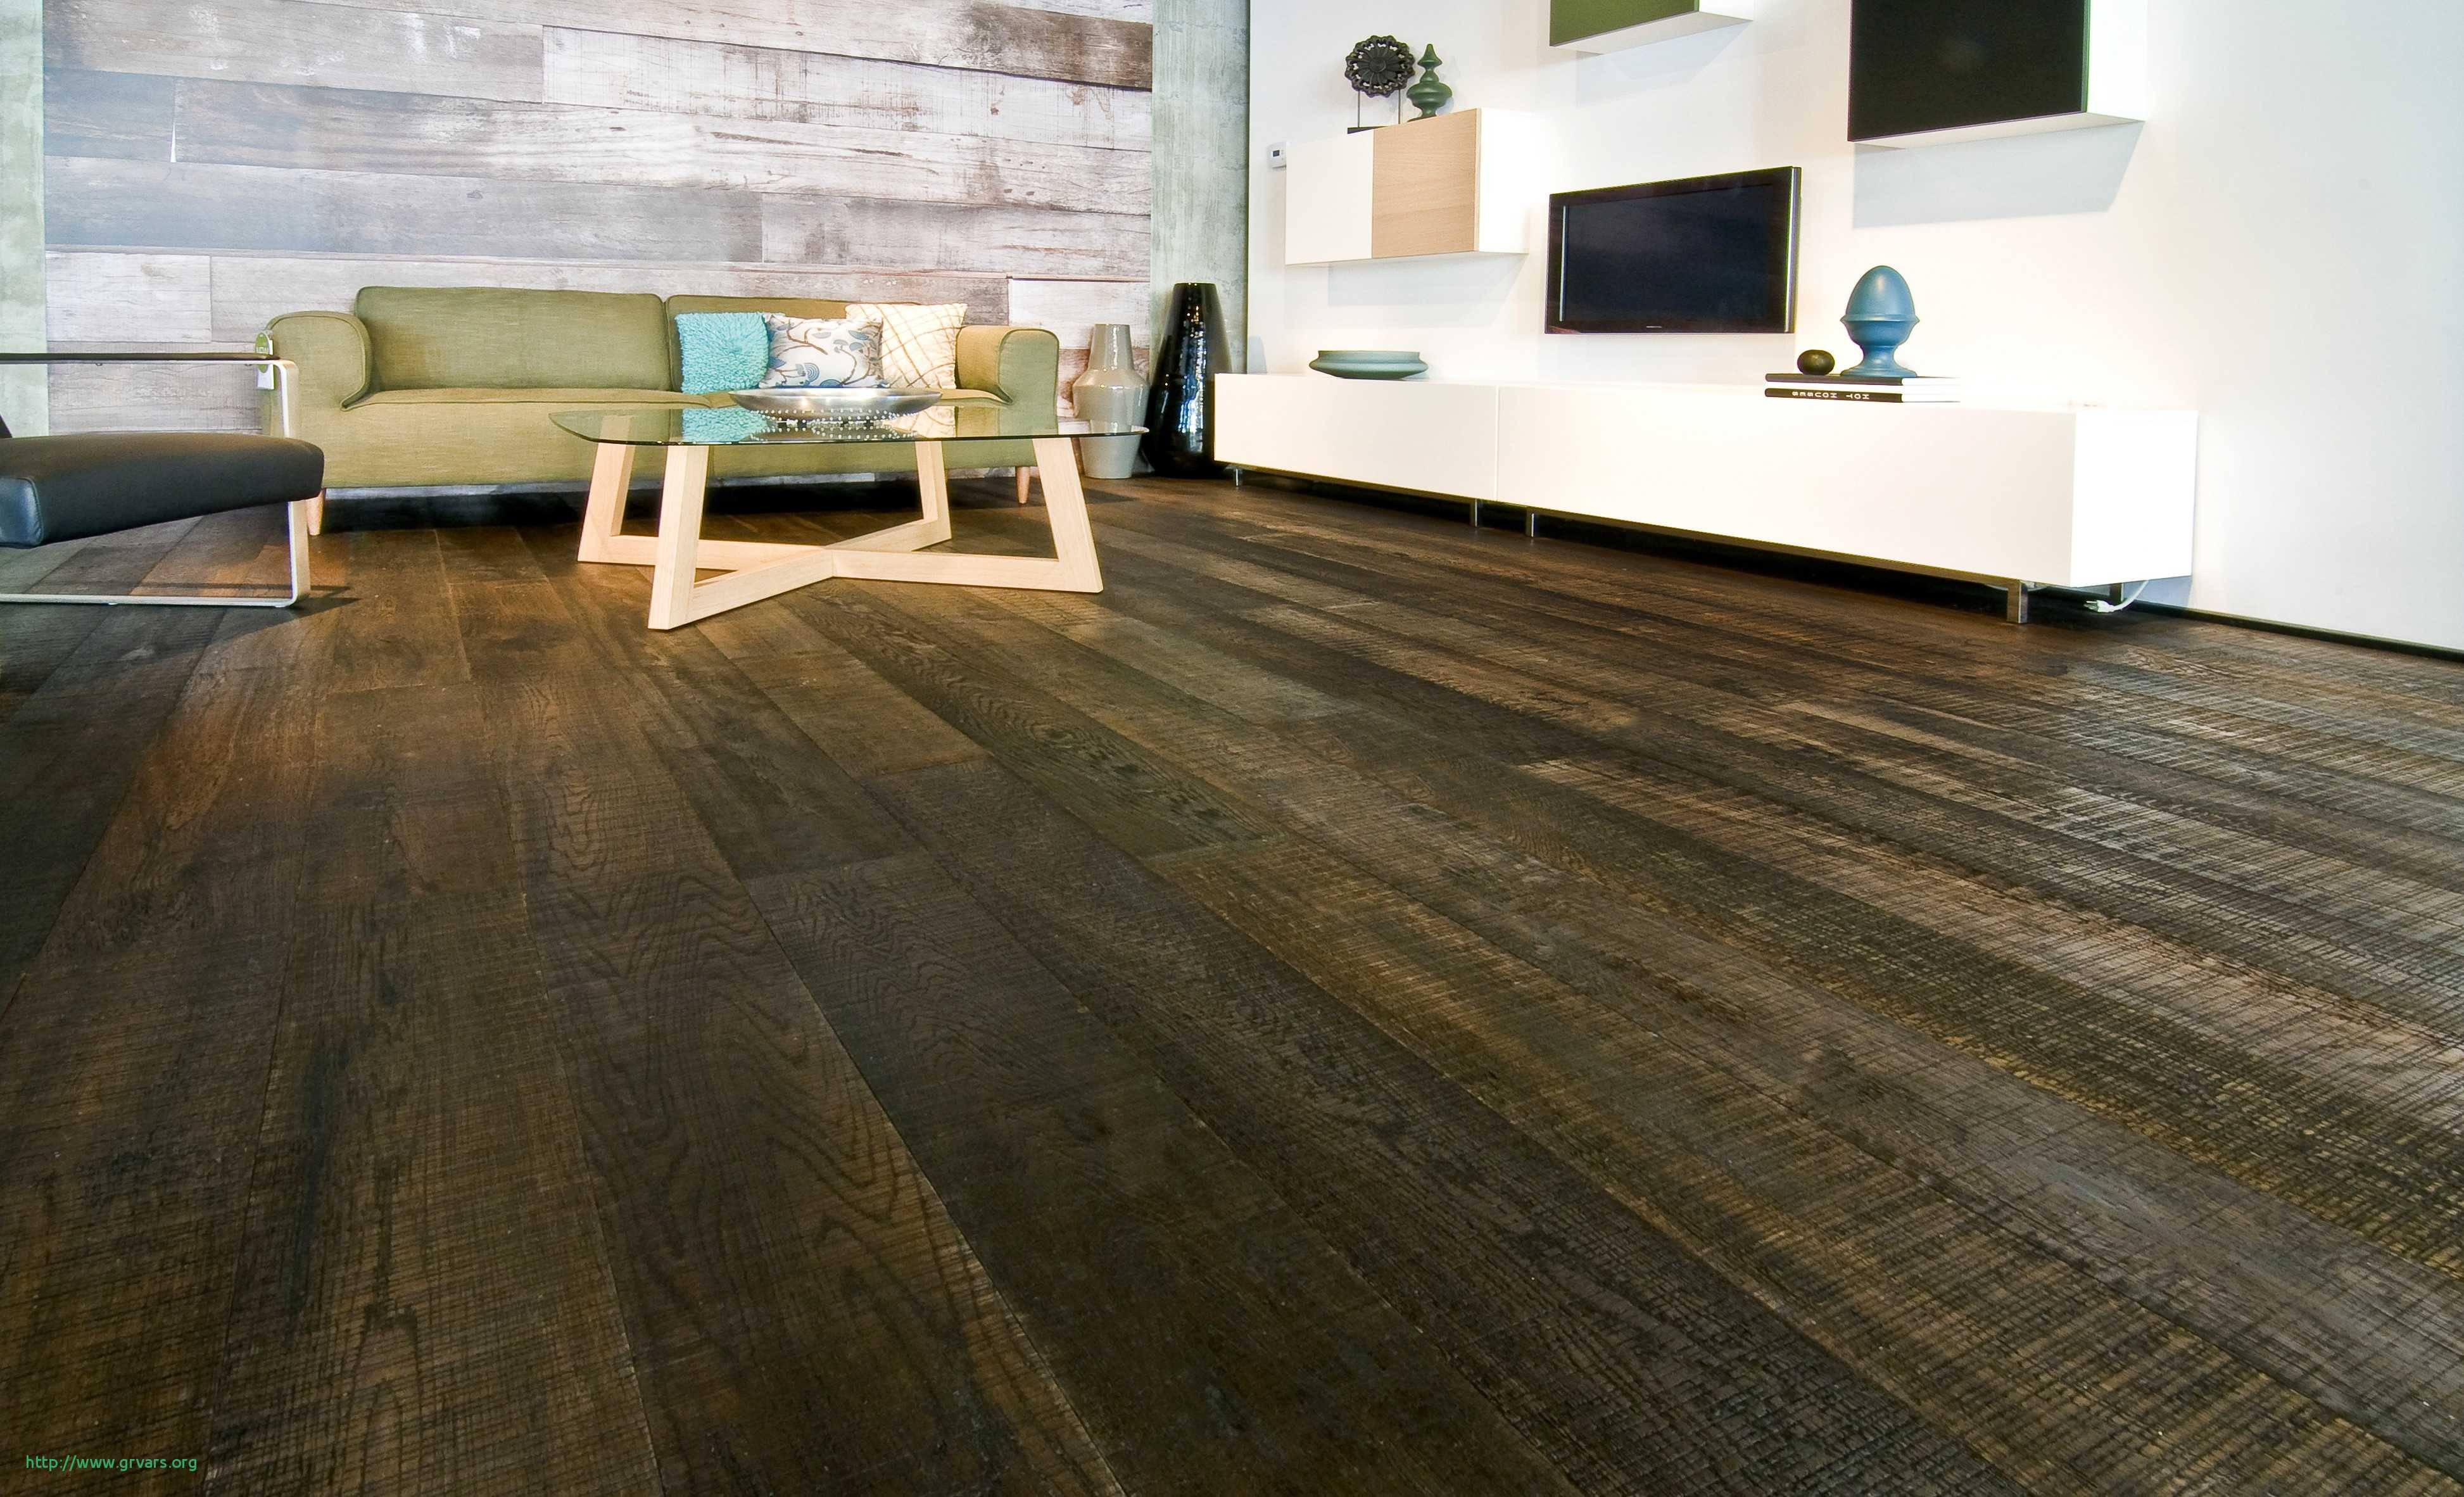 25 Awesome Hardwood Floor Refinishing Austin Tx 2024 free download hardwood floor refinishing austin tx of 15 beau best place for hardwood flooring ideas blog intended for acacia wood flooring where to buy hardwood flooring inspirational 0d grace place barn